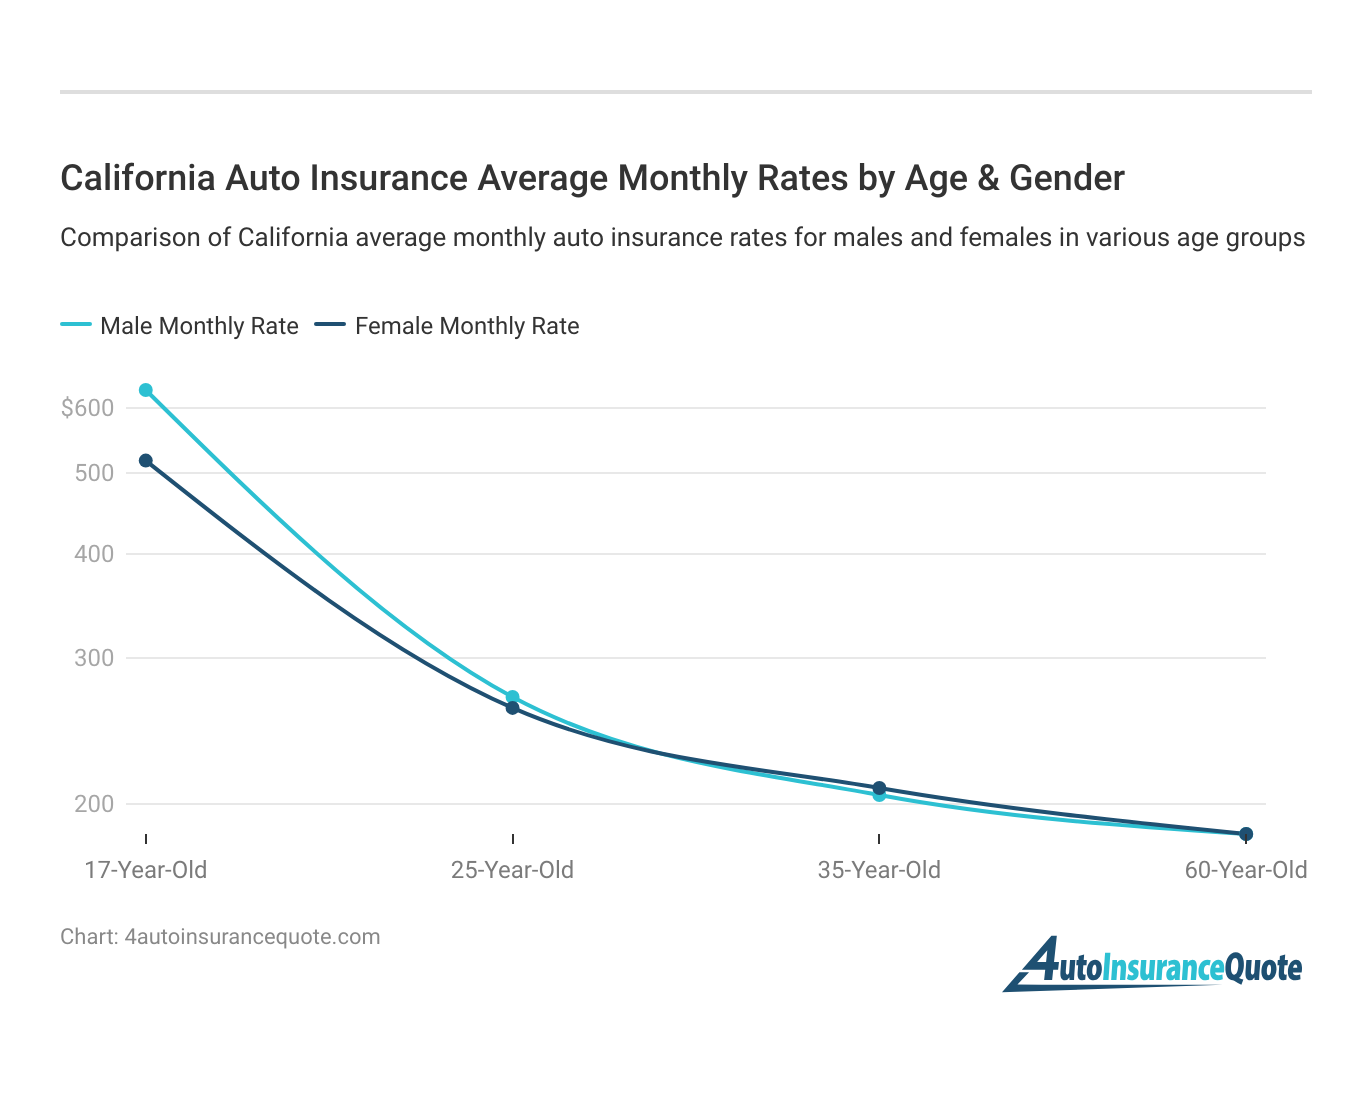 <h3>California Auto Insurance Average Monthly Rates by Age & Gender</h3>